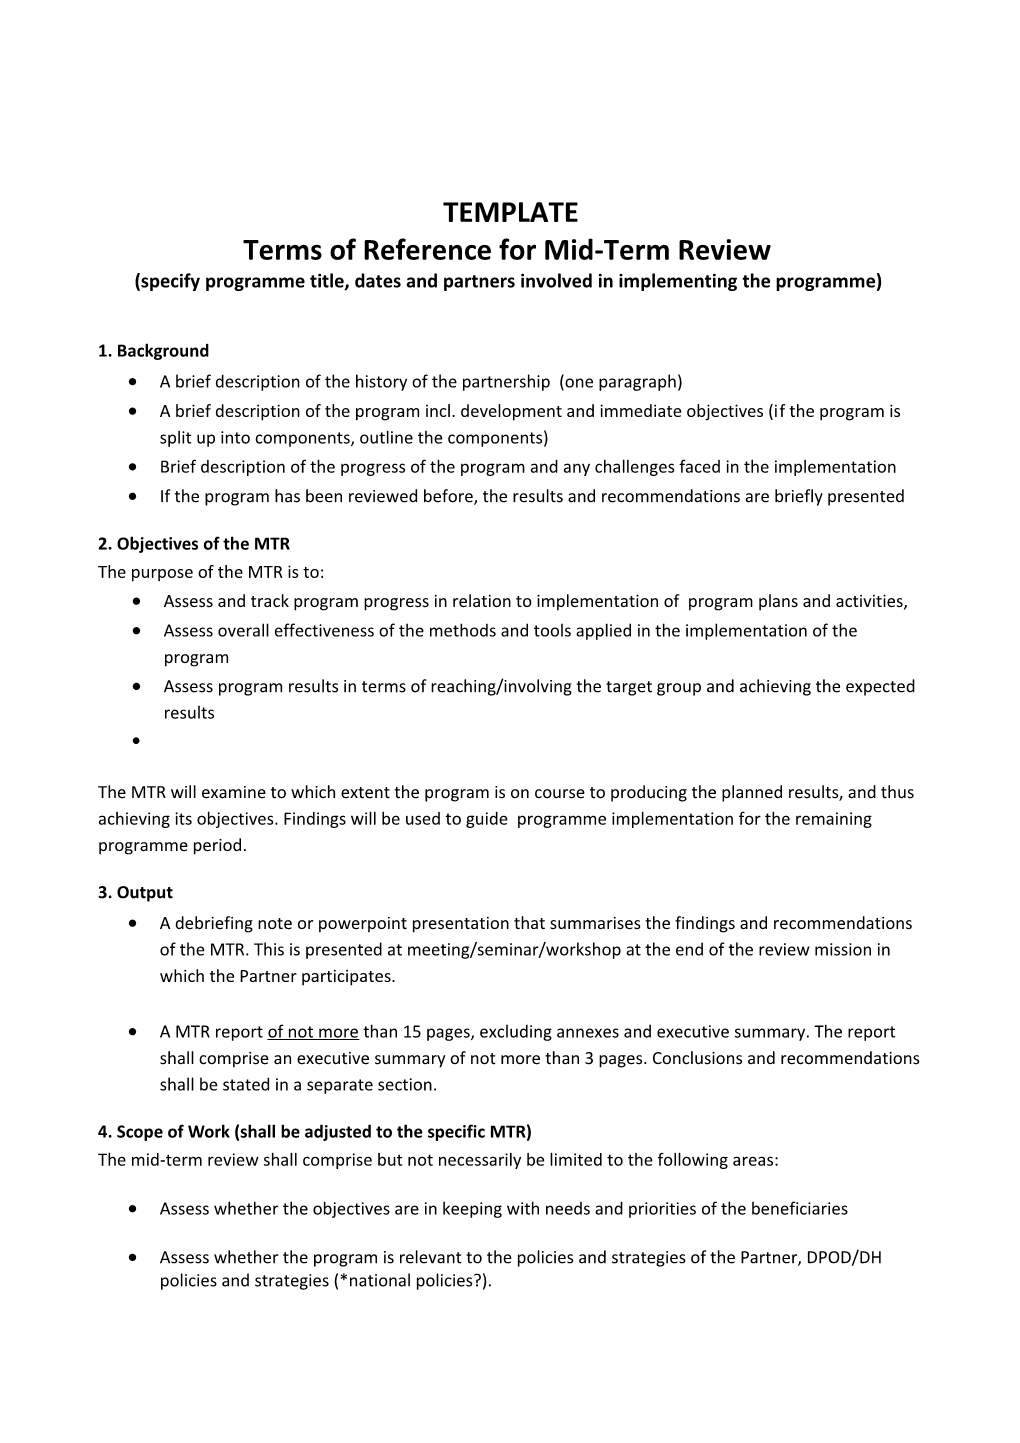 Terms of Reference for Mid-Term Review